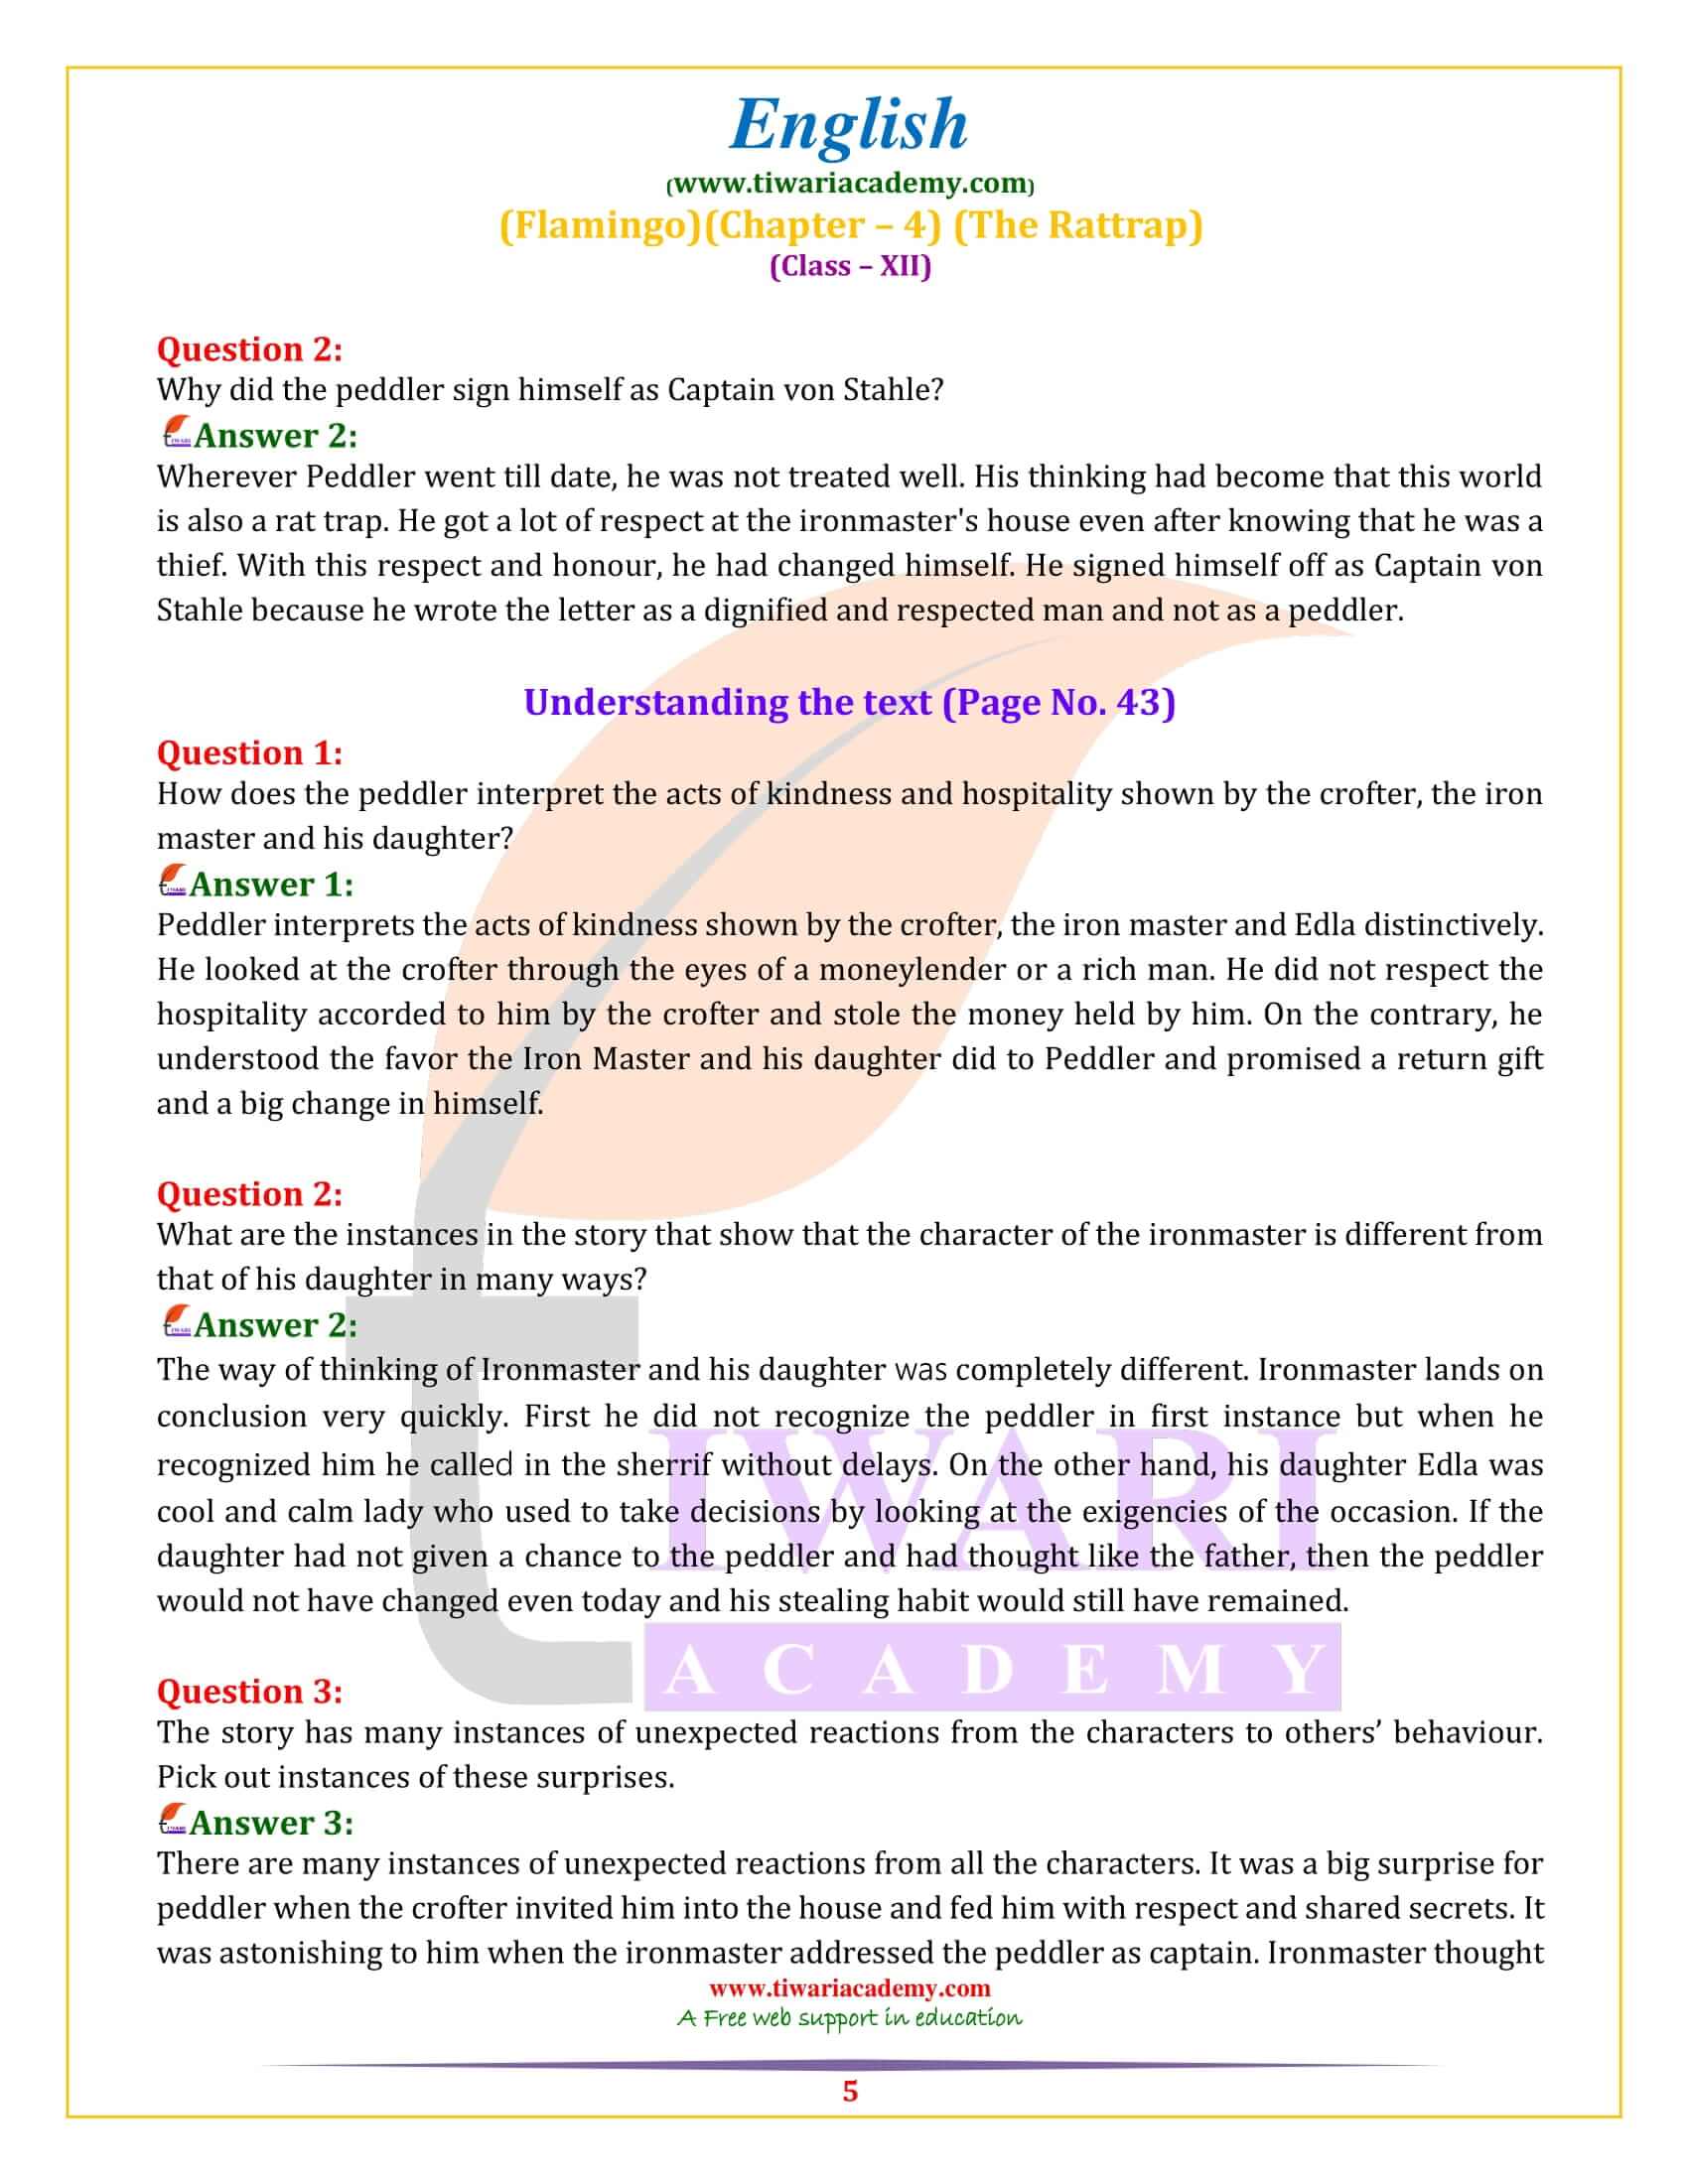 NCERT Solutions for Class 12 English Flamingo Chapter 4